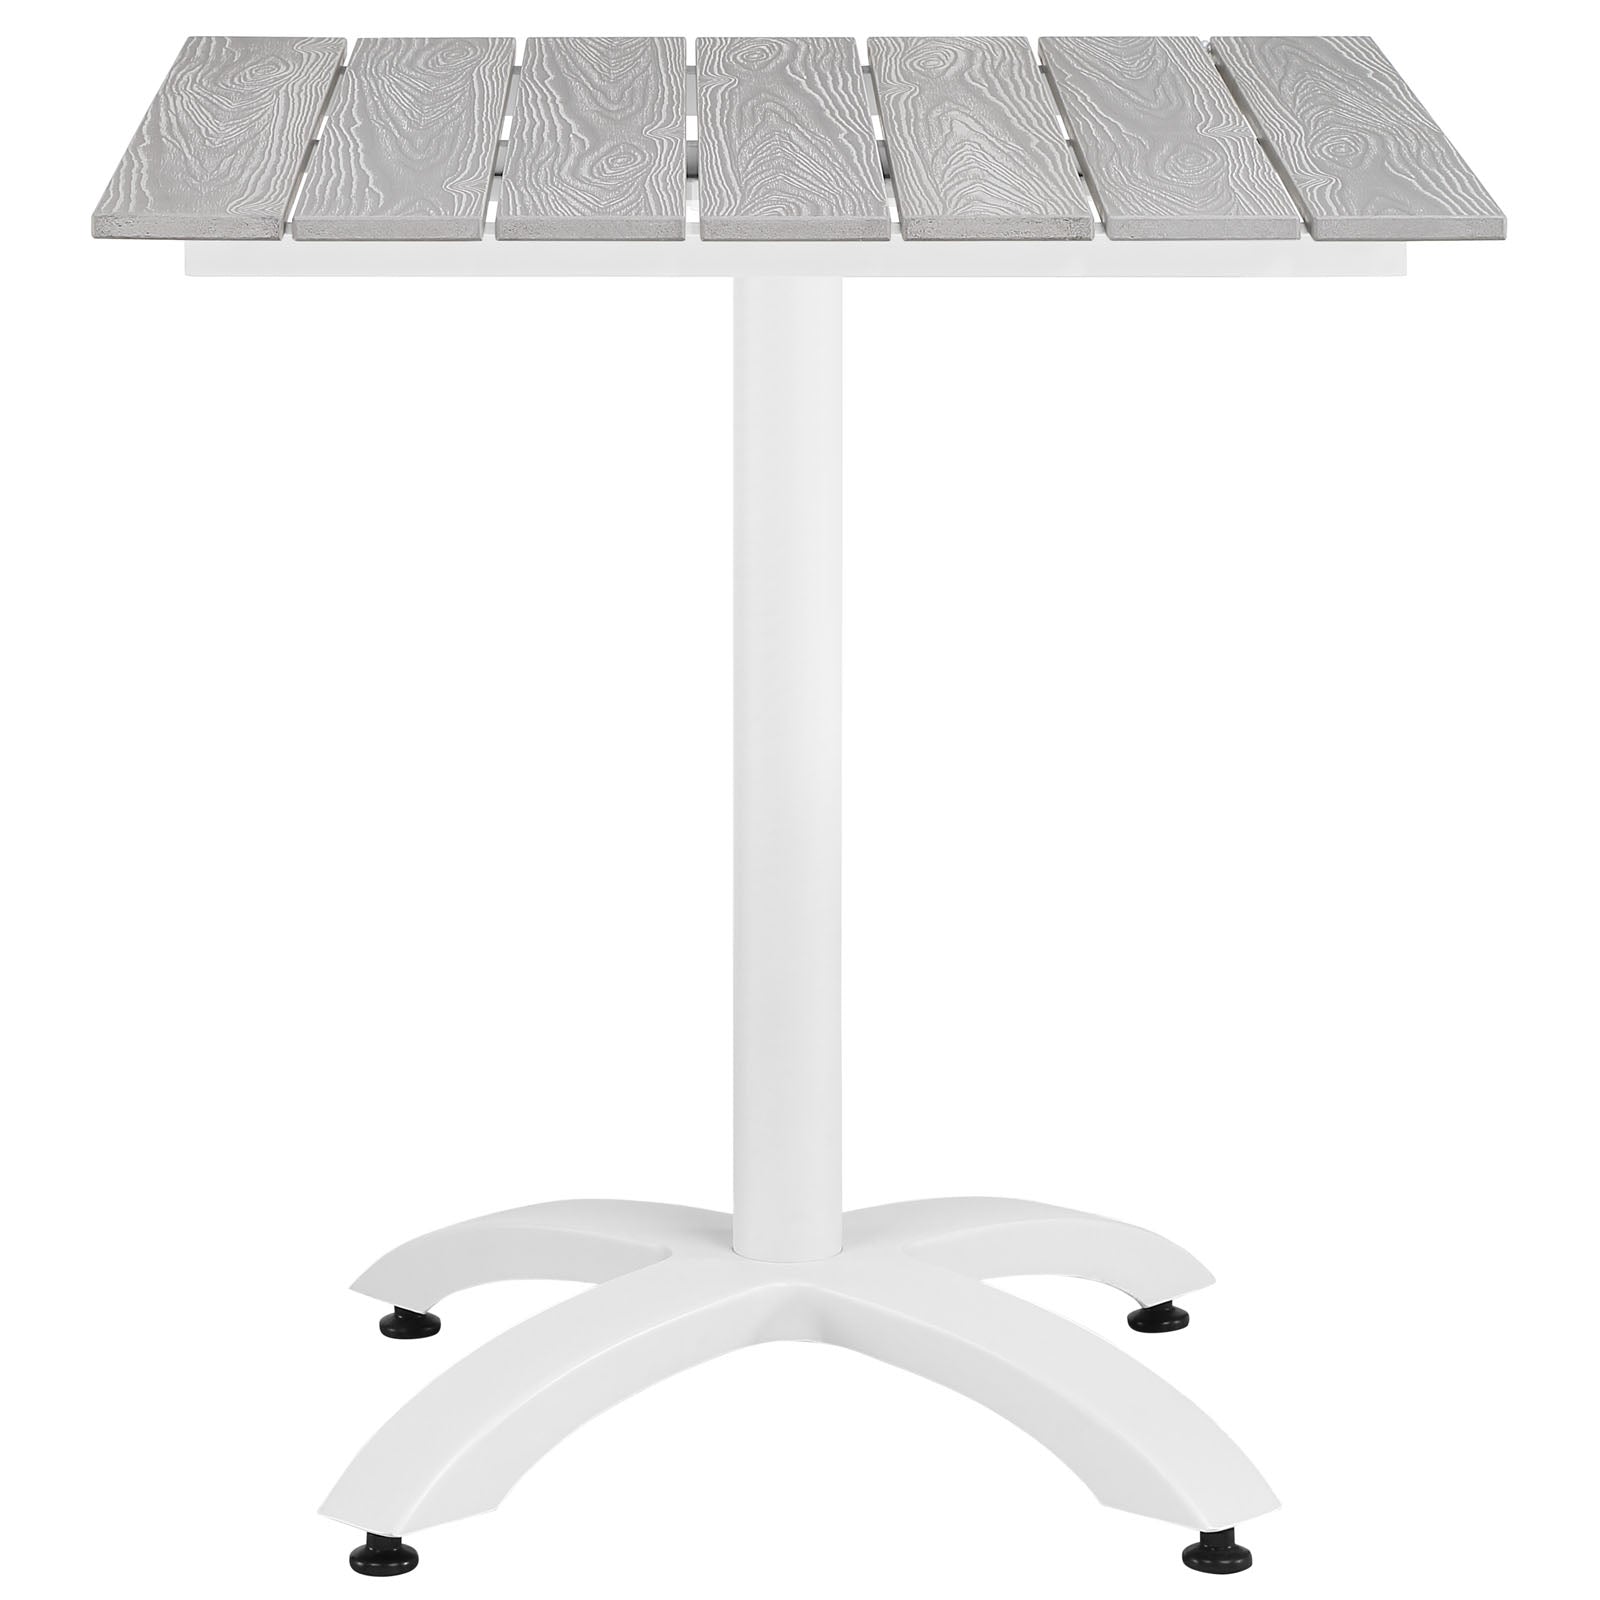 Modway Outdoor Dining Tables - Maine 28" Outdoor Patio Dining Table White & Light Gray